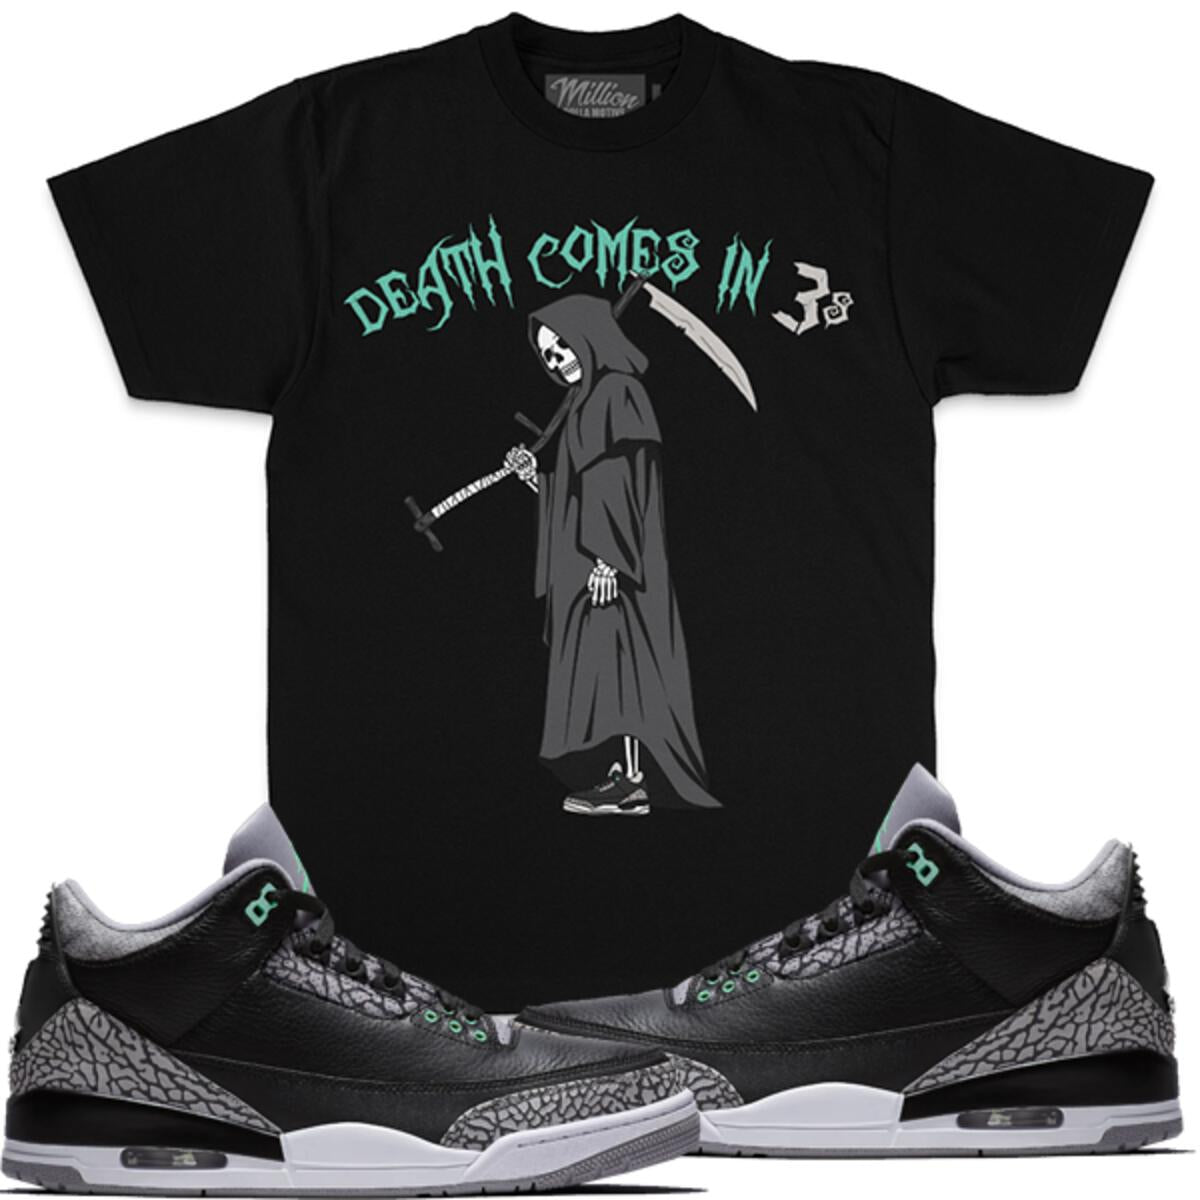 Motive Comes in 3’s T-shirt Black